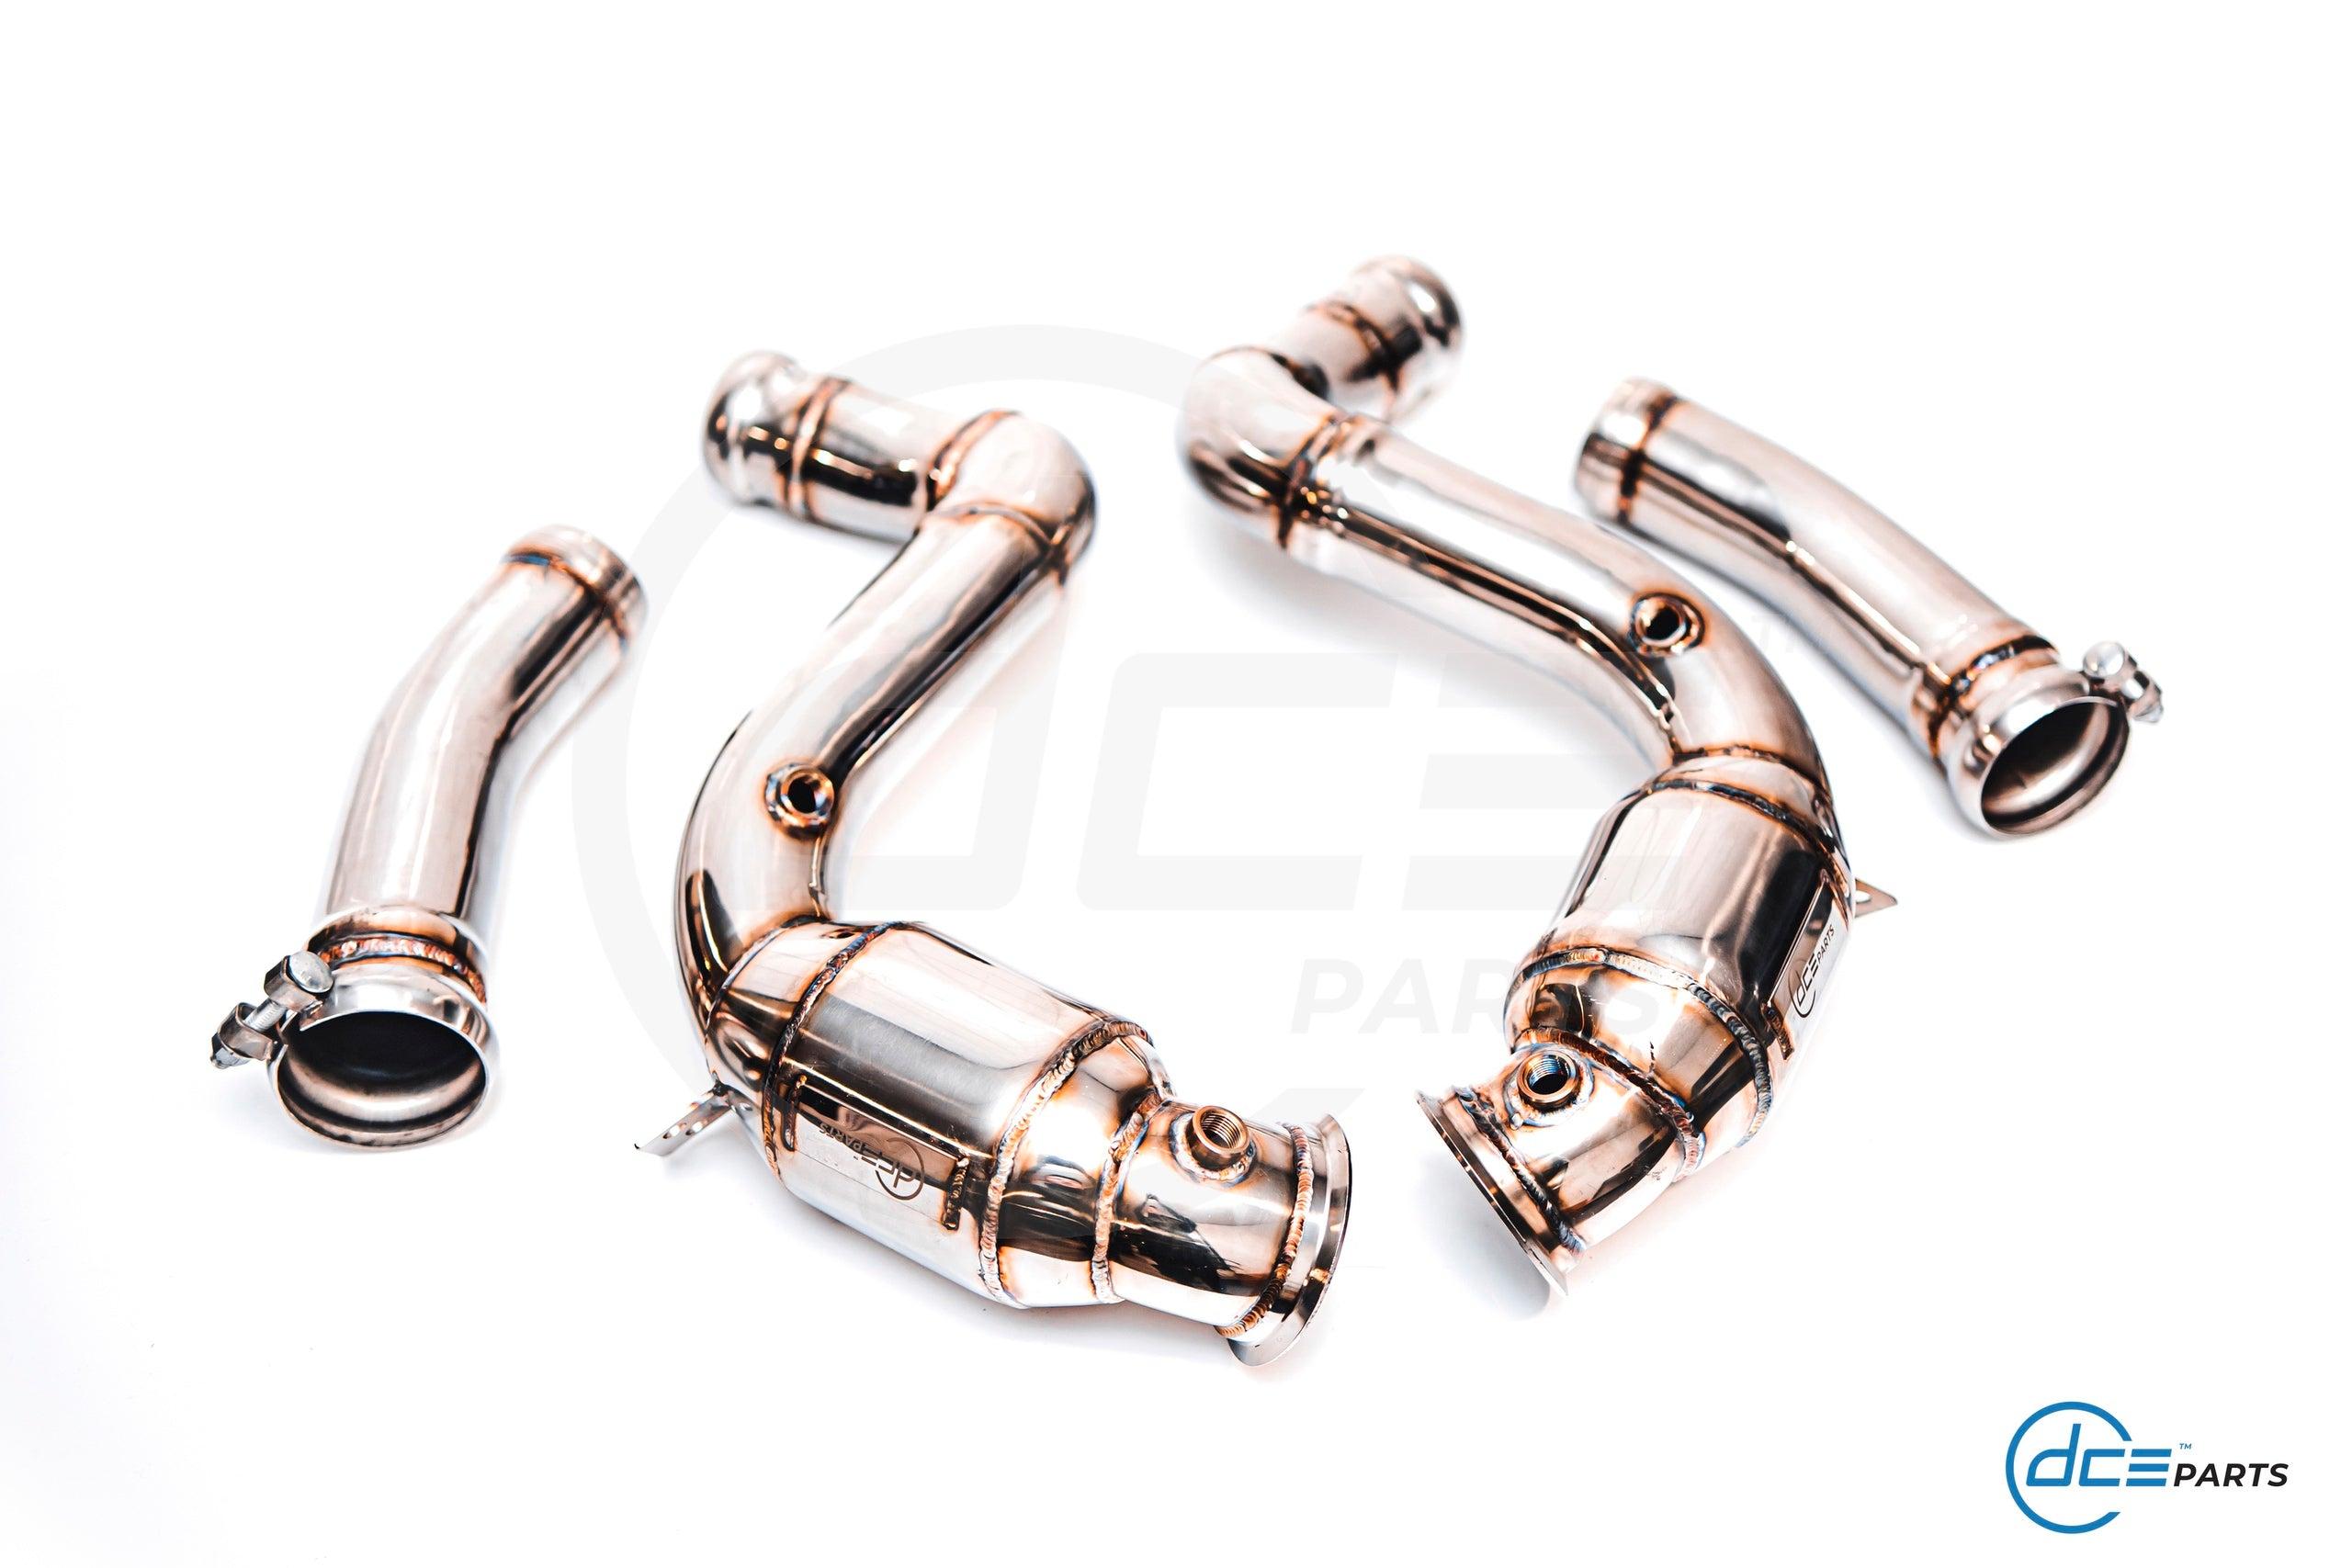 MERCEDES-BENZ DOWNPIPE W205 C63 AMG 4.0L - DCE